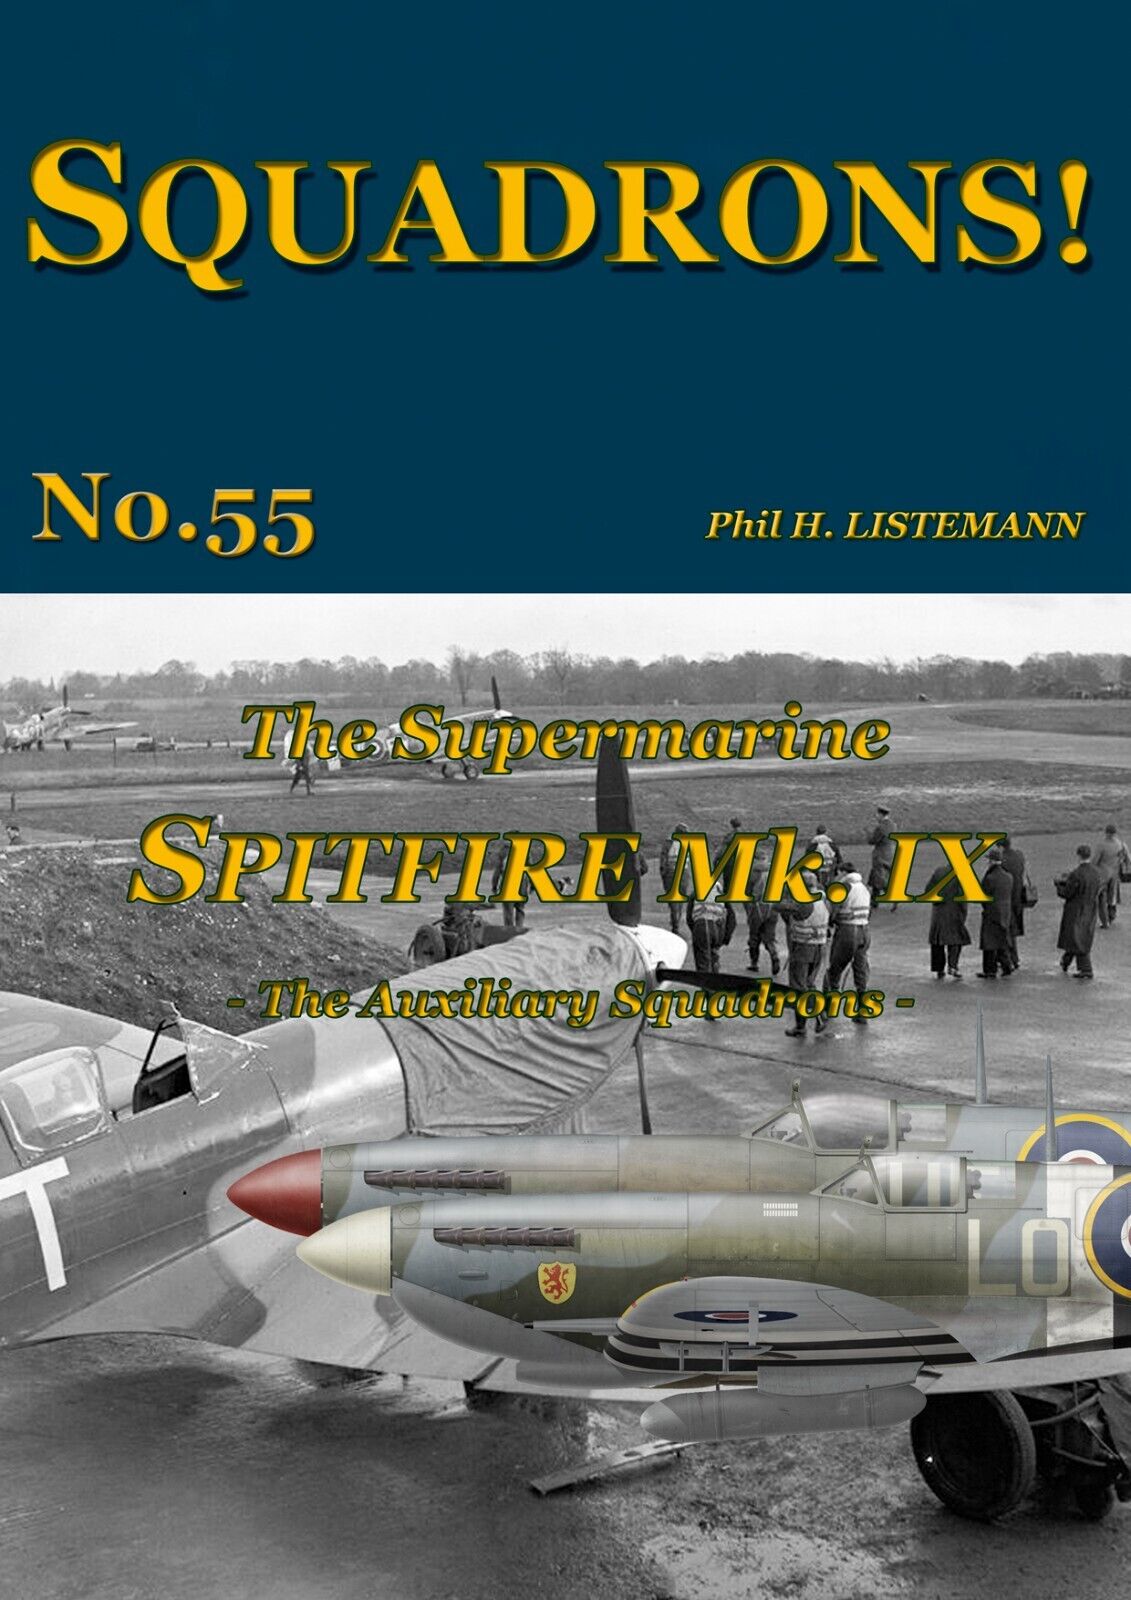 SQUADRONS No. 55 - The Spitfire Mk IX - The Auxiliary Squadrons